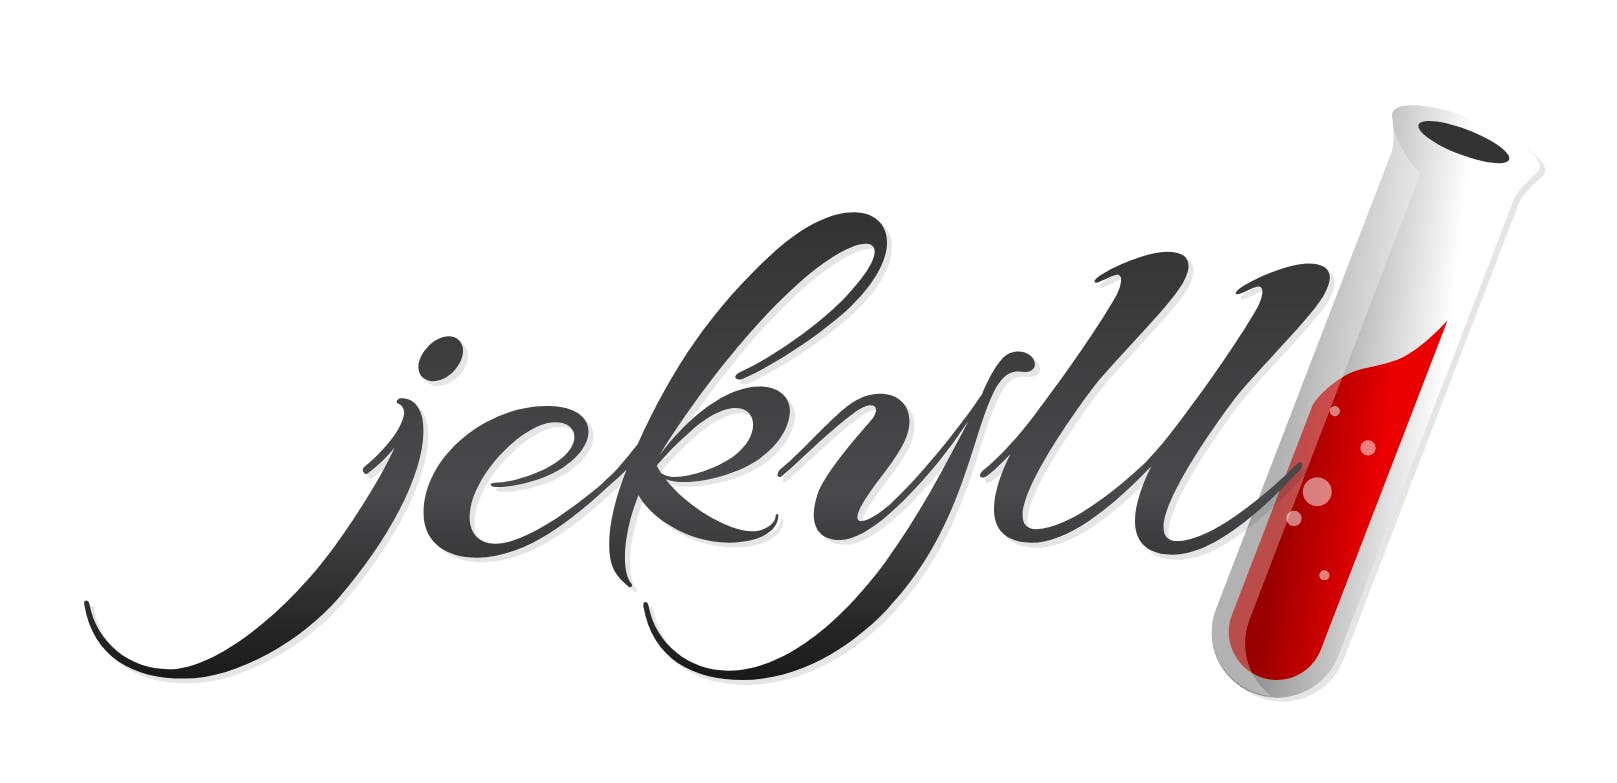 Jekyll is the most popular SSG for designing blogs